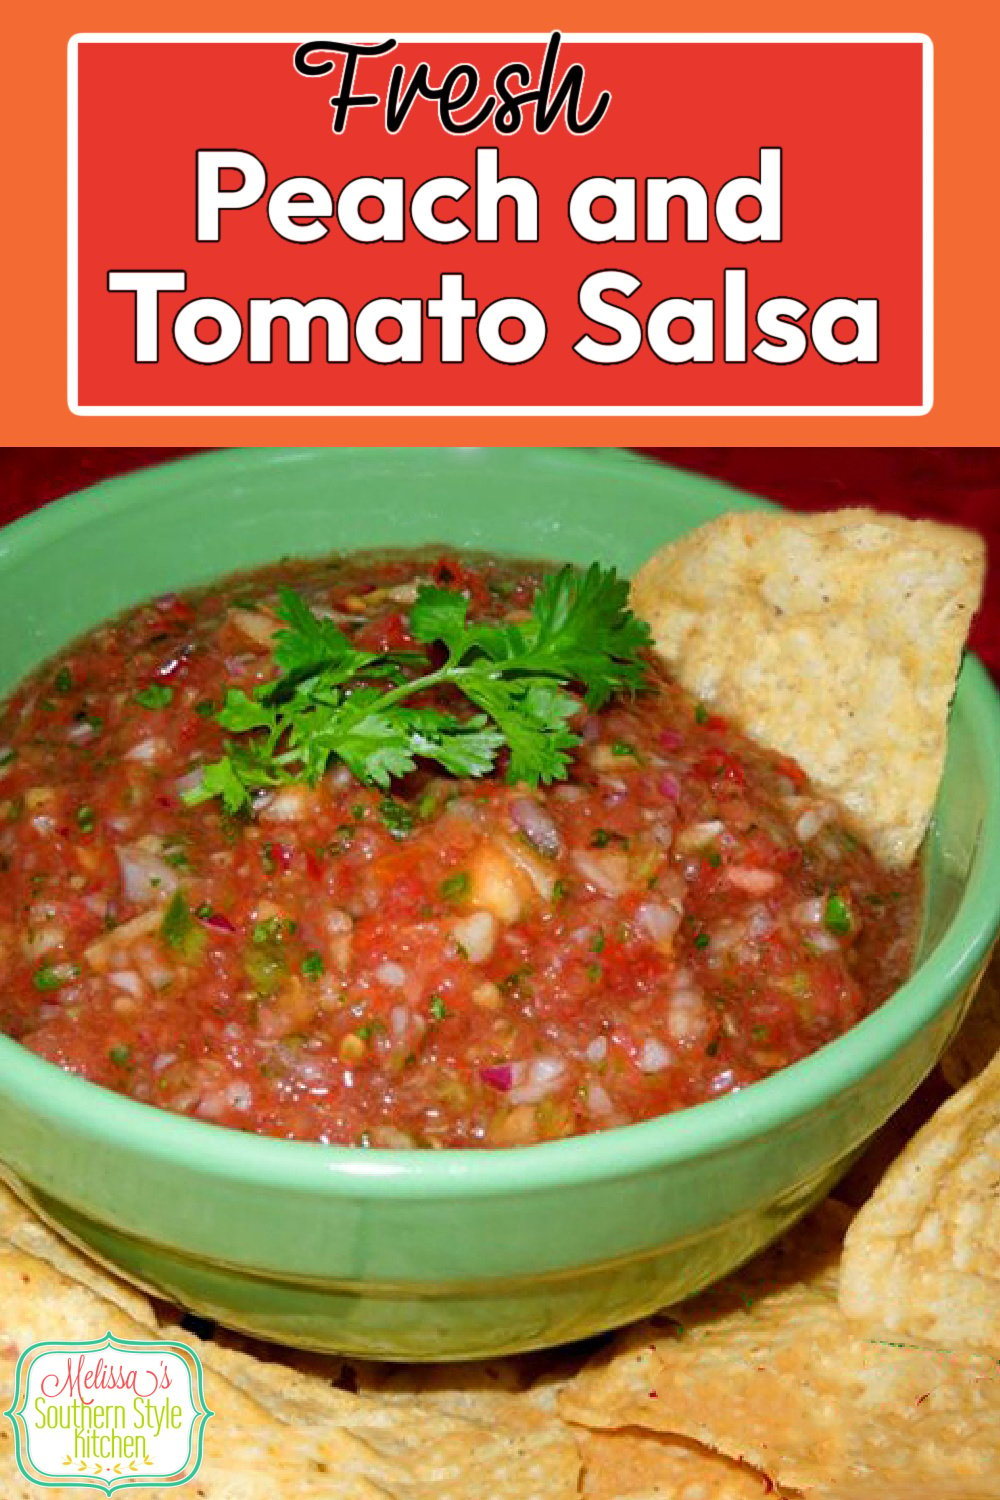 Enjoy this flavorful Fresh Peach Tomato Salsa as a condiment with fish, chicken and pork or with tortilla chips for dipping #salsa #peachsalsa #tomatosalsa #peaches #tomatoes #condimentrecipes #appetizers #snacks #easyrecipes #vegetarian #healthyrecipes #southernfood #southernrecipes via @melissasssk